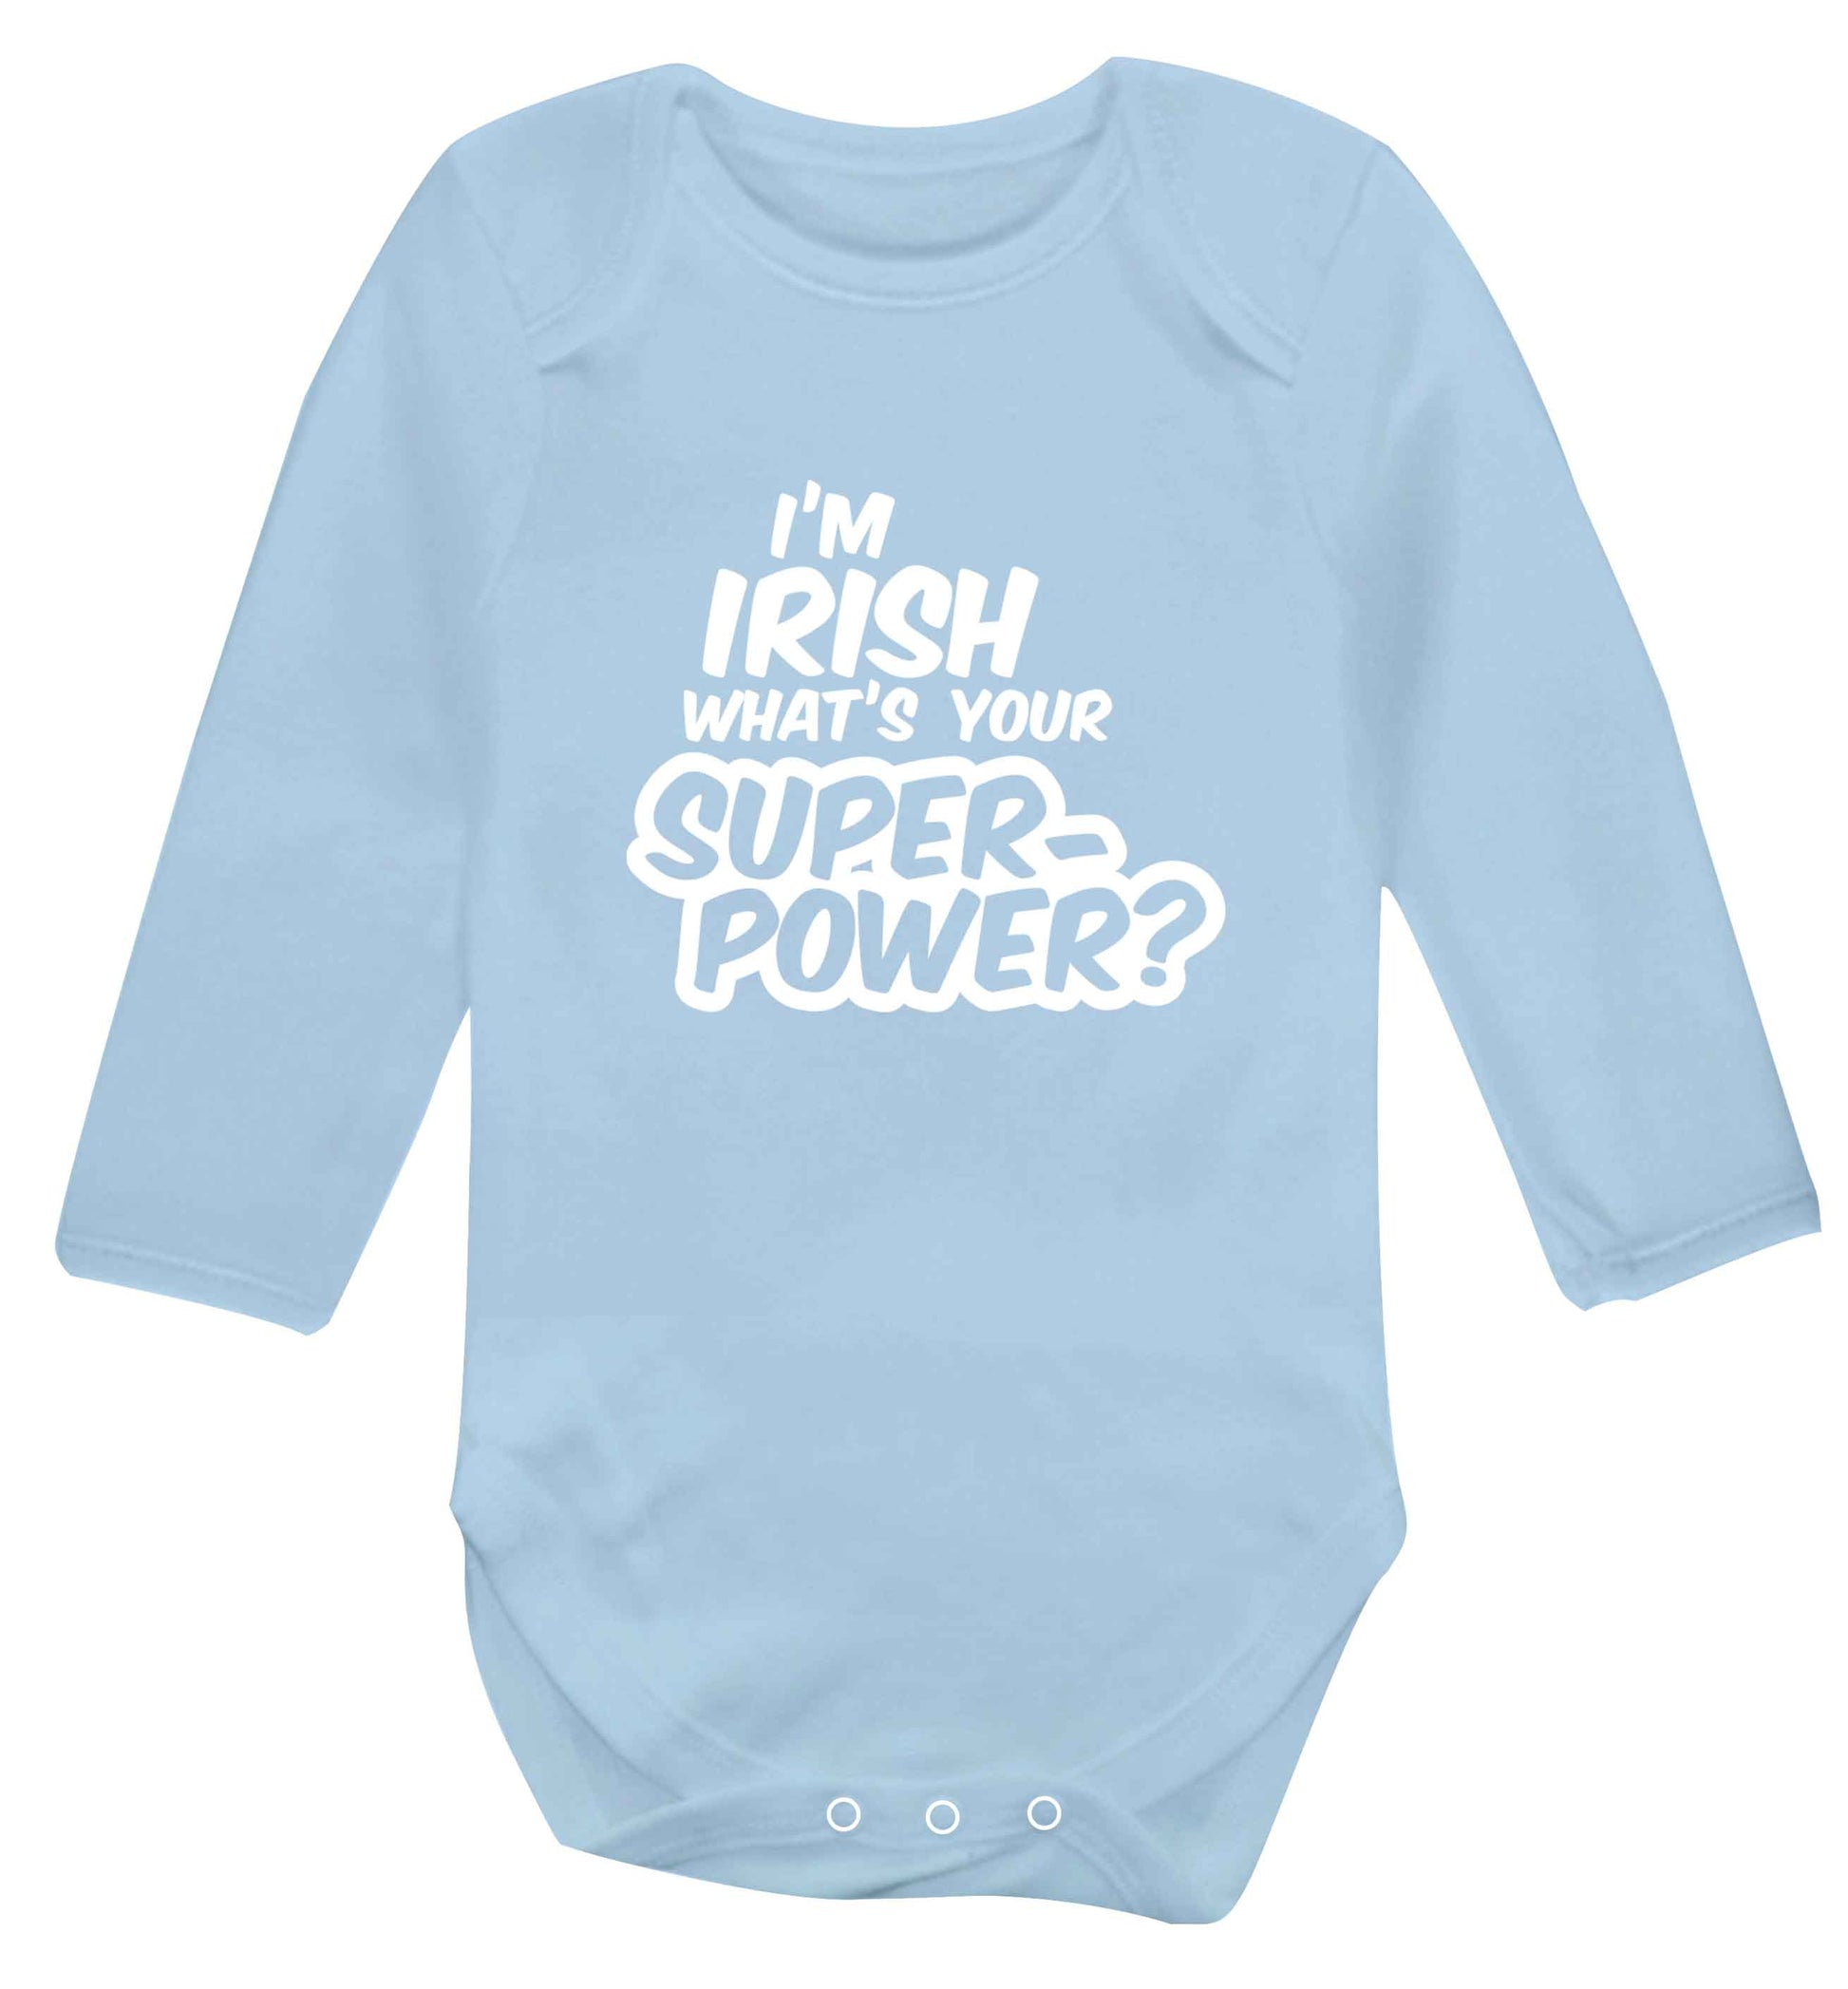 I'm Irish what's your superpower? baby vest long sleeved pale blue 6-12 months